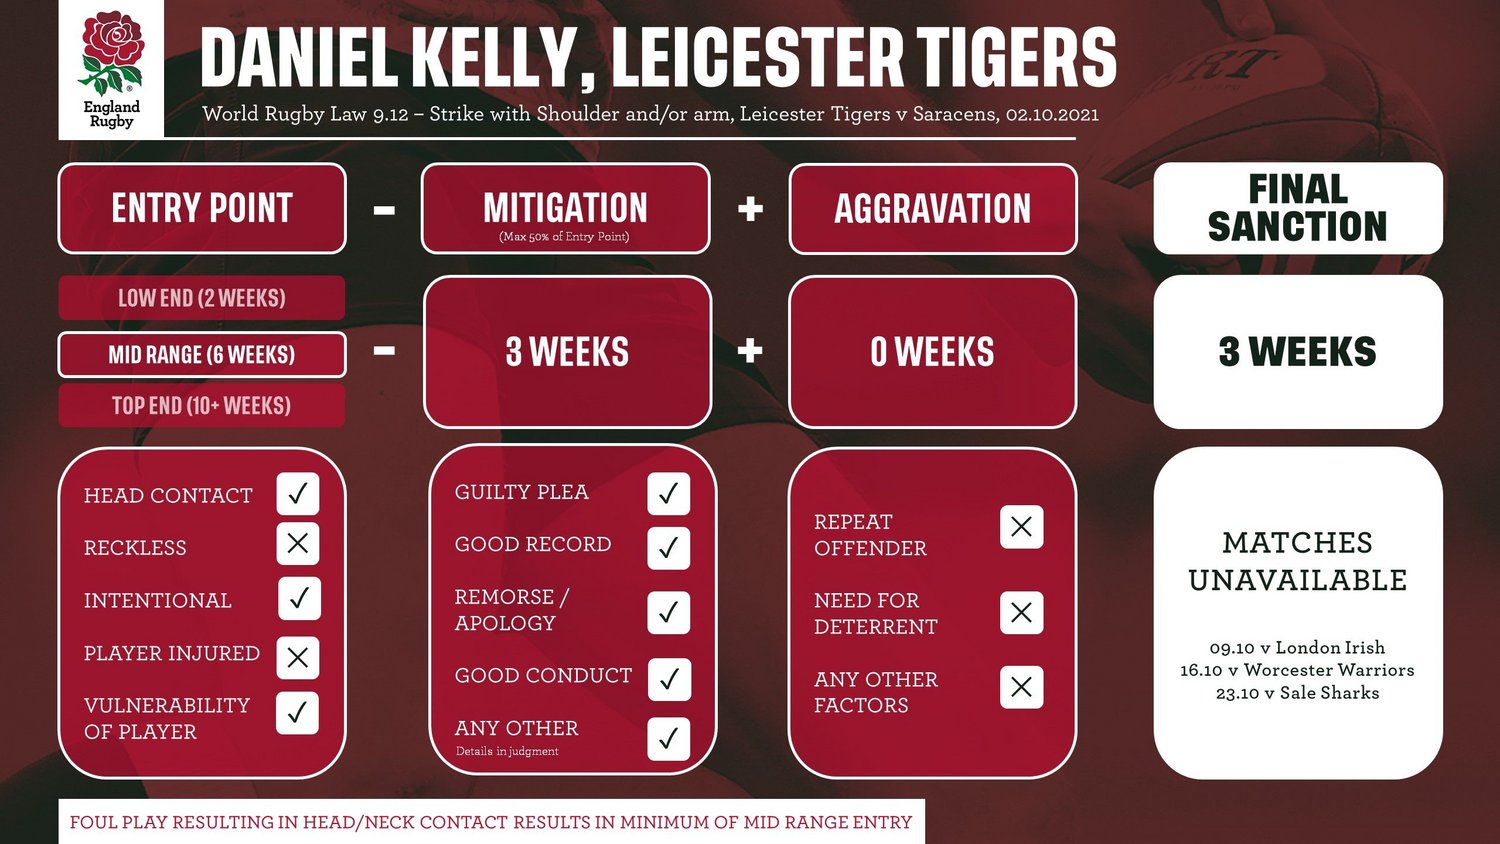 Final Sanction: Dan Kelly, Leicester Tigers